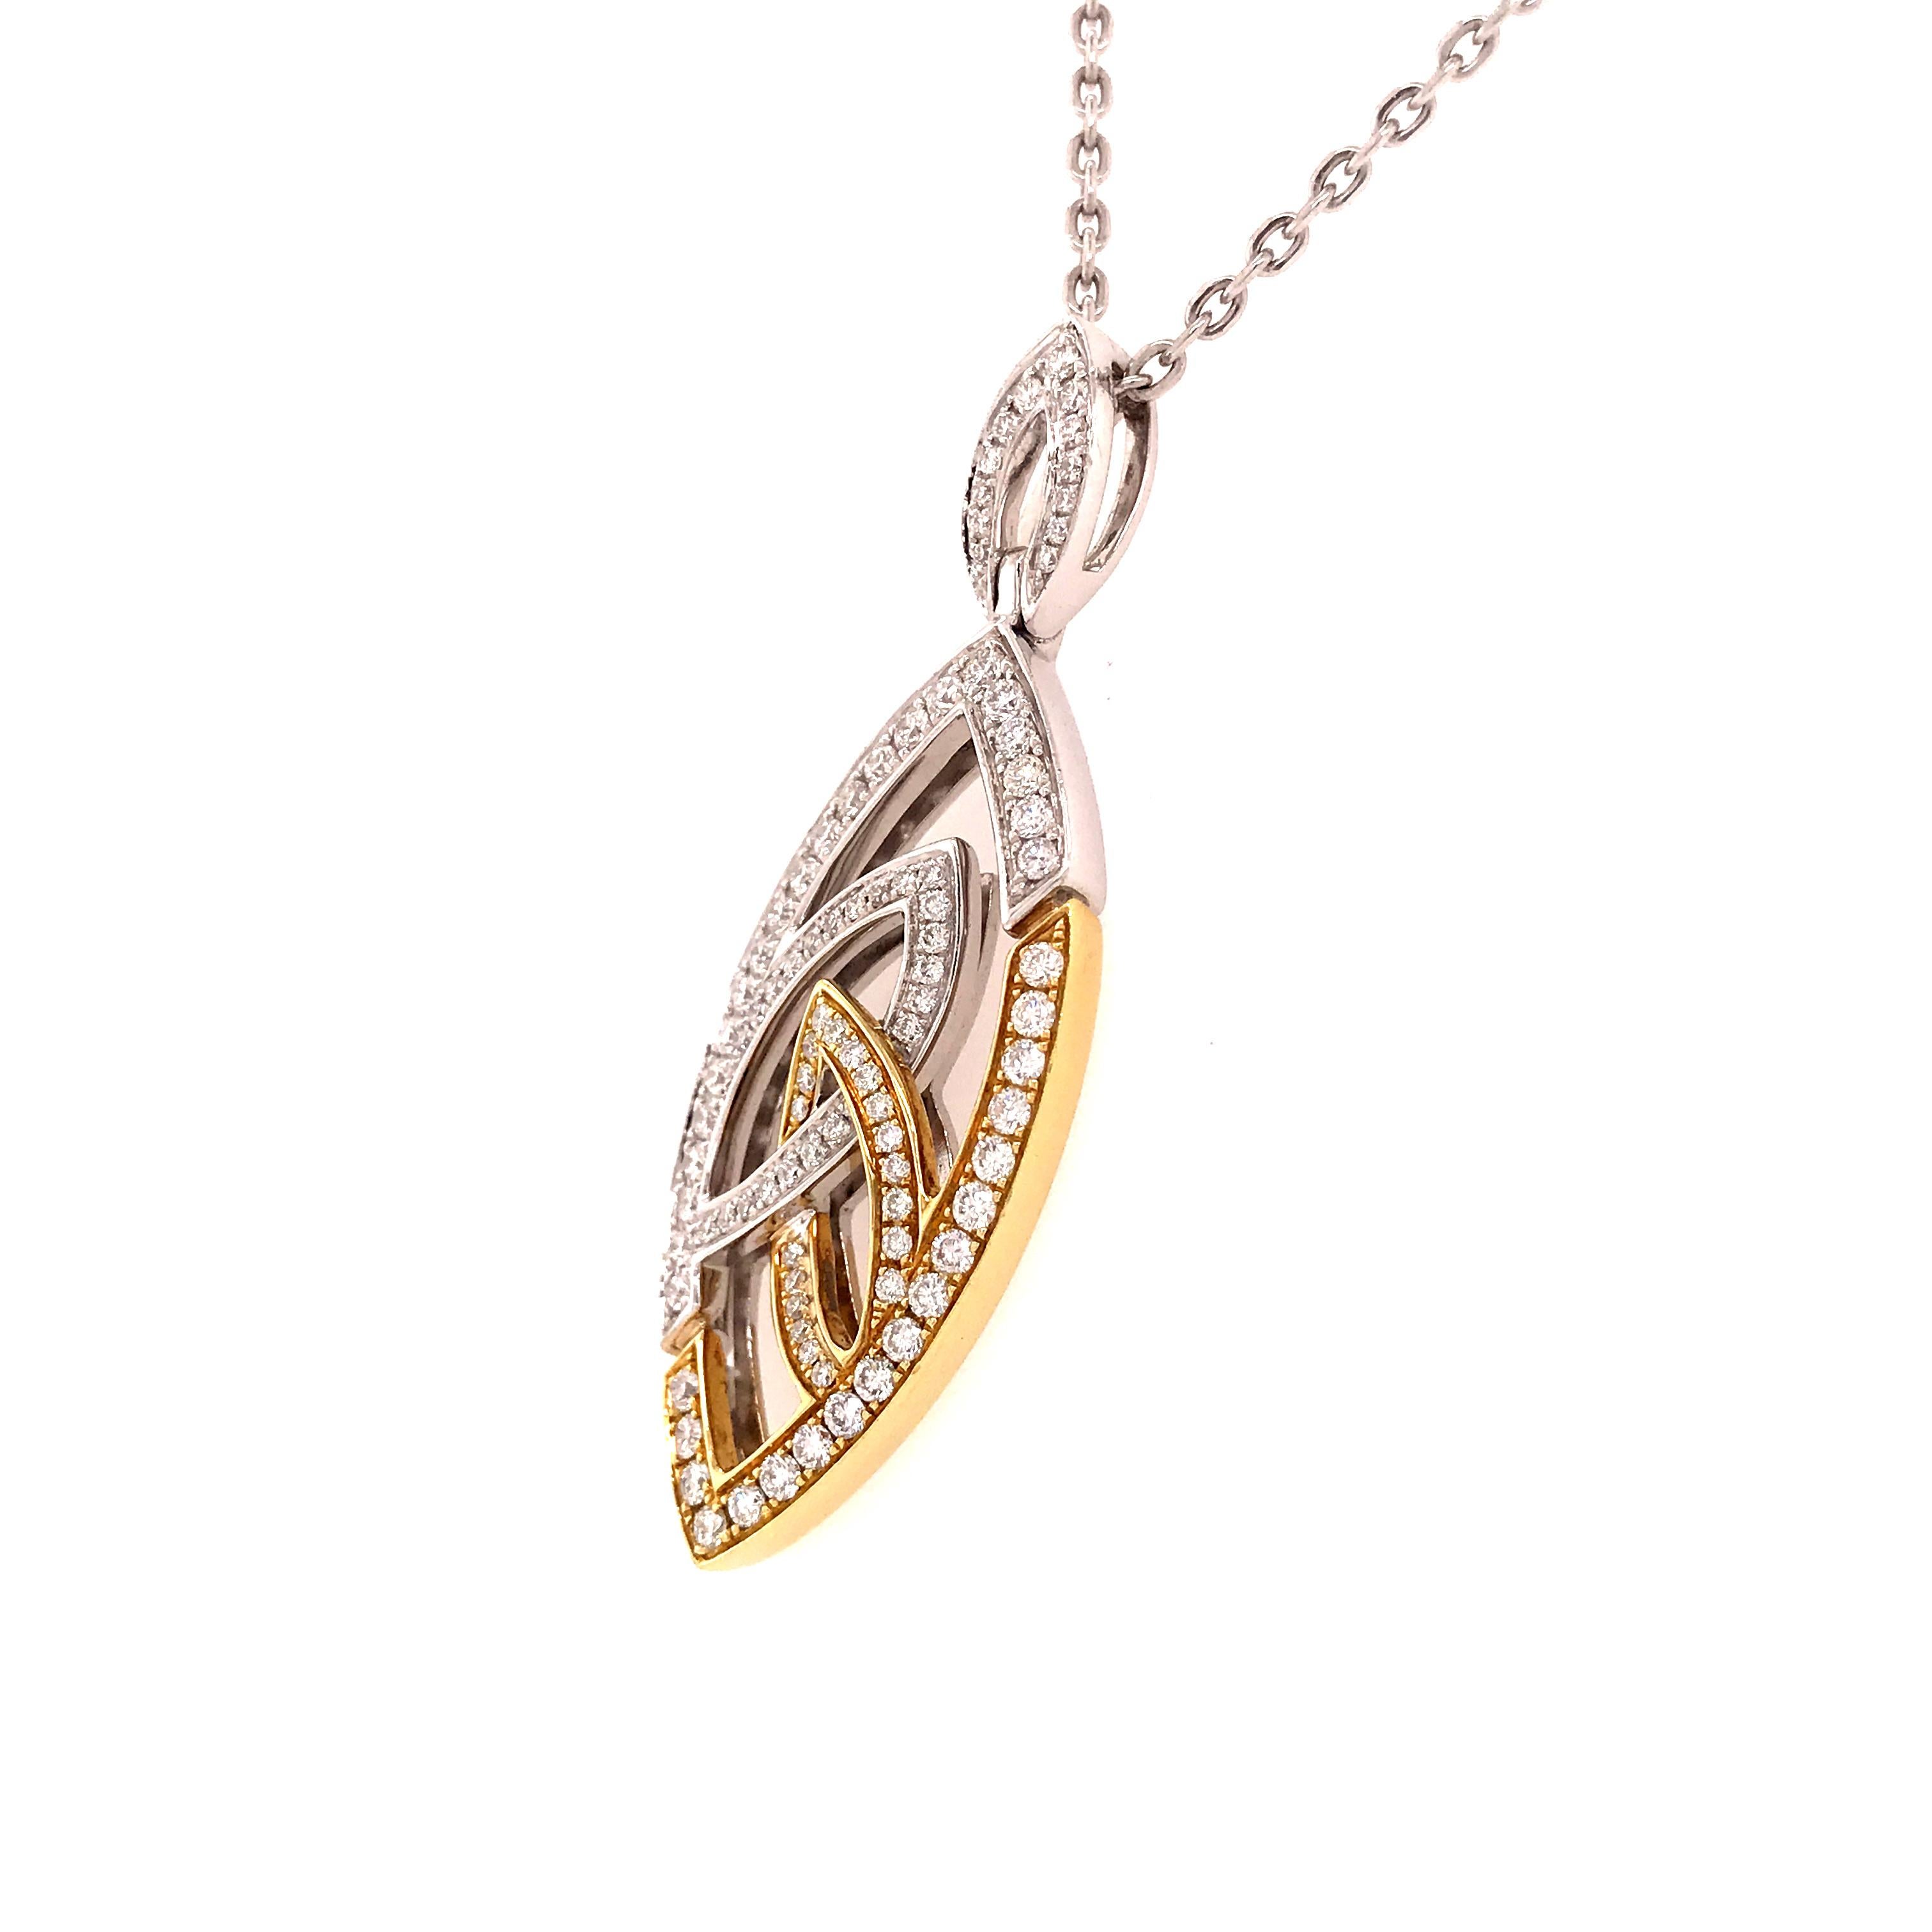 This is a stunning 18K Yellow and White Gold Necklace. The Pendant is a 1 3/4 by 1/2 inch Marquise Shape designed in both White and Yellow Gold expertly set with (96) Round Brilliant Cut Diamonds, approximately 1.64ctw, G-H in Color and VS in